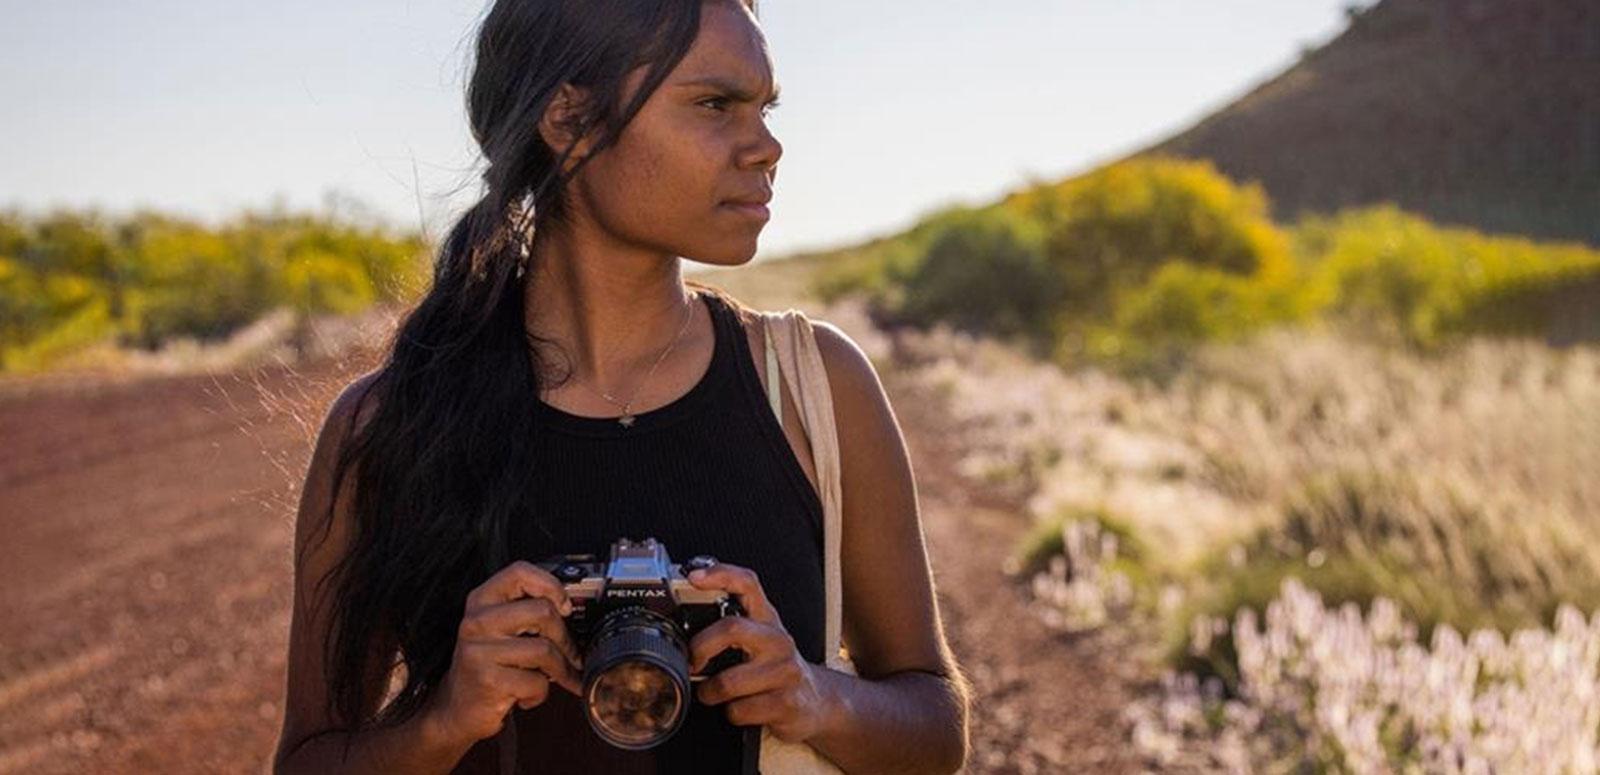 A teenage First Nations girl standing on an outback dirt road holding a camera and looking into the distance.